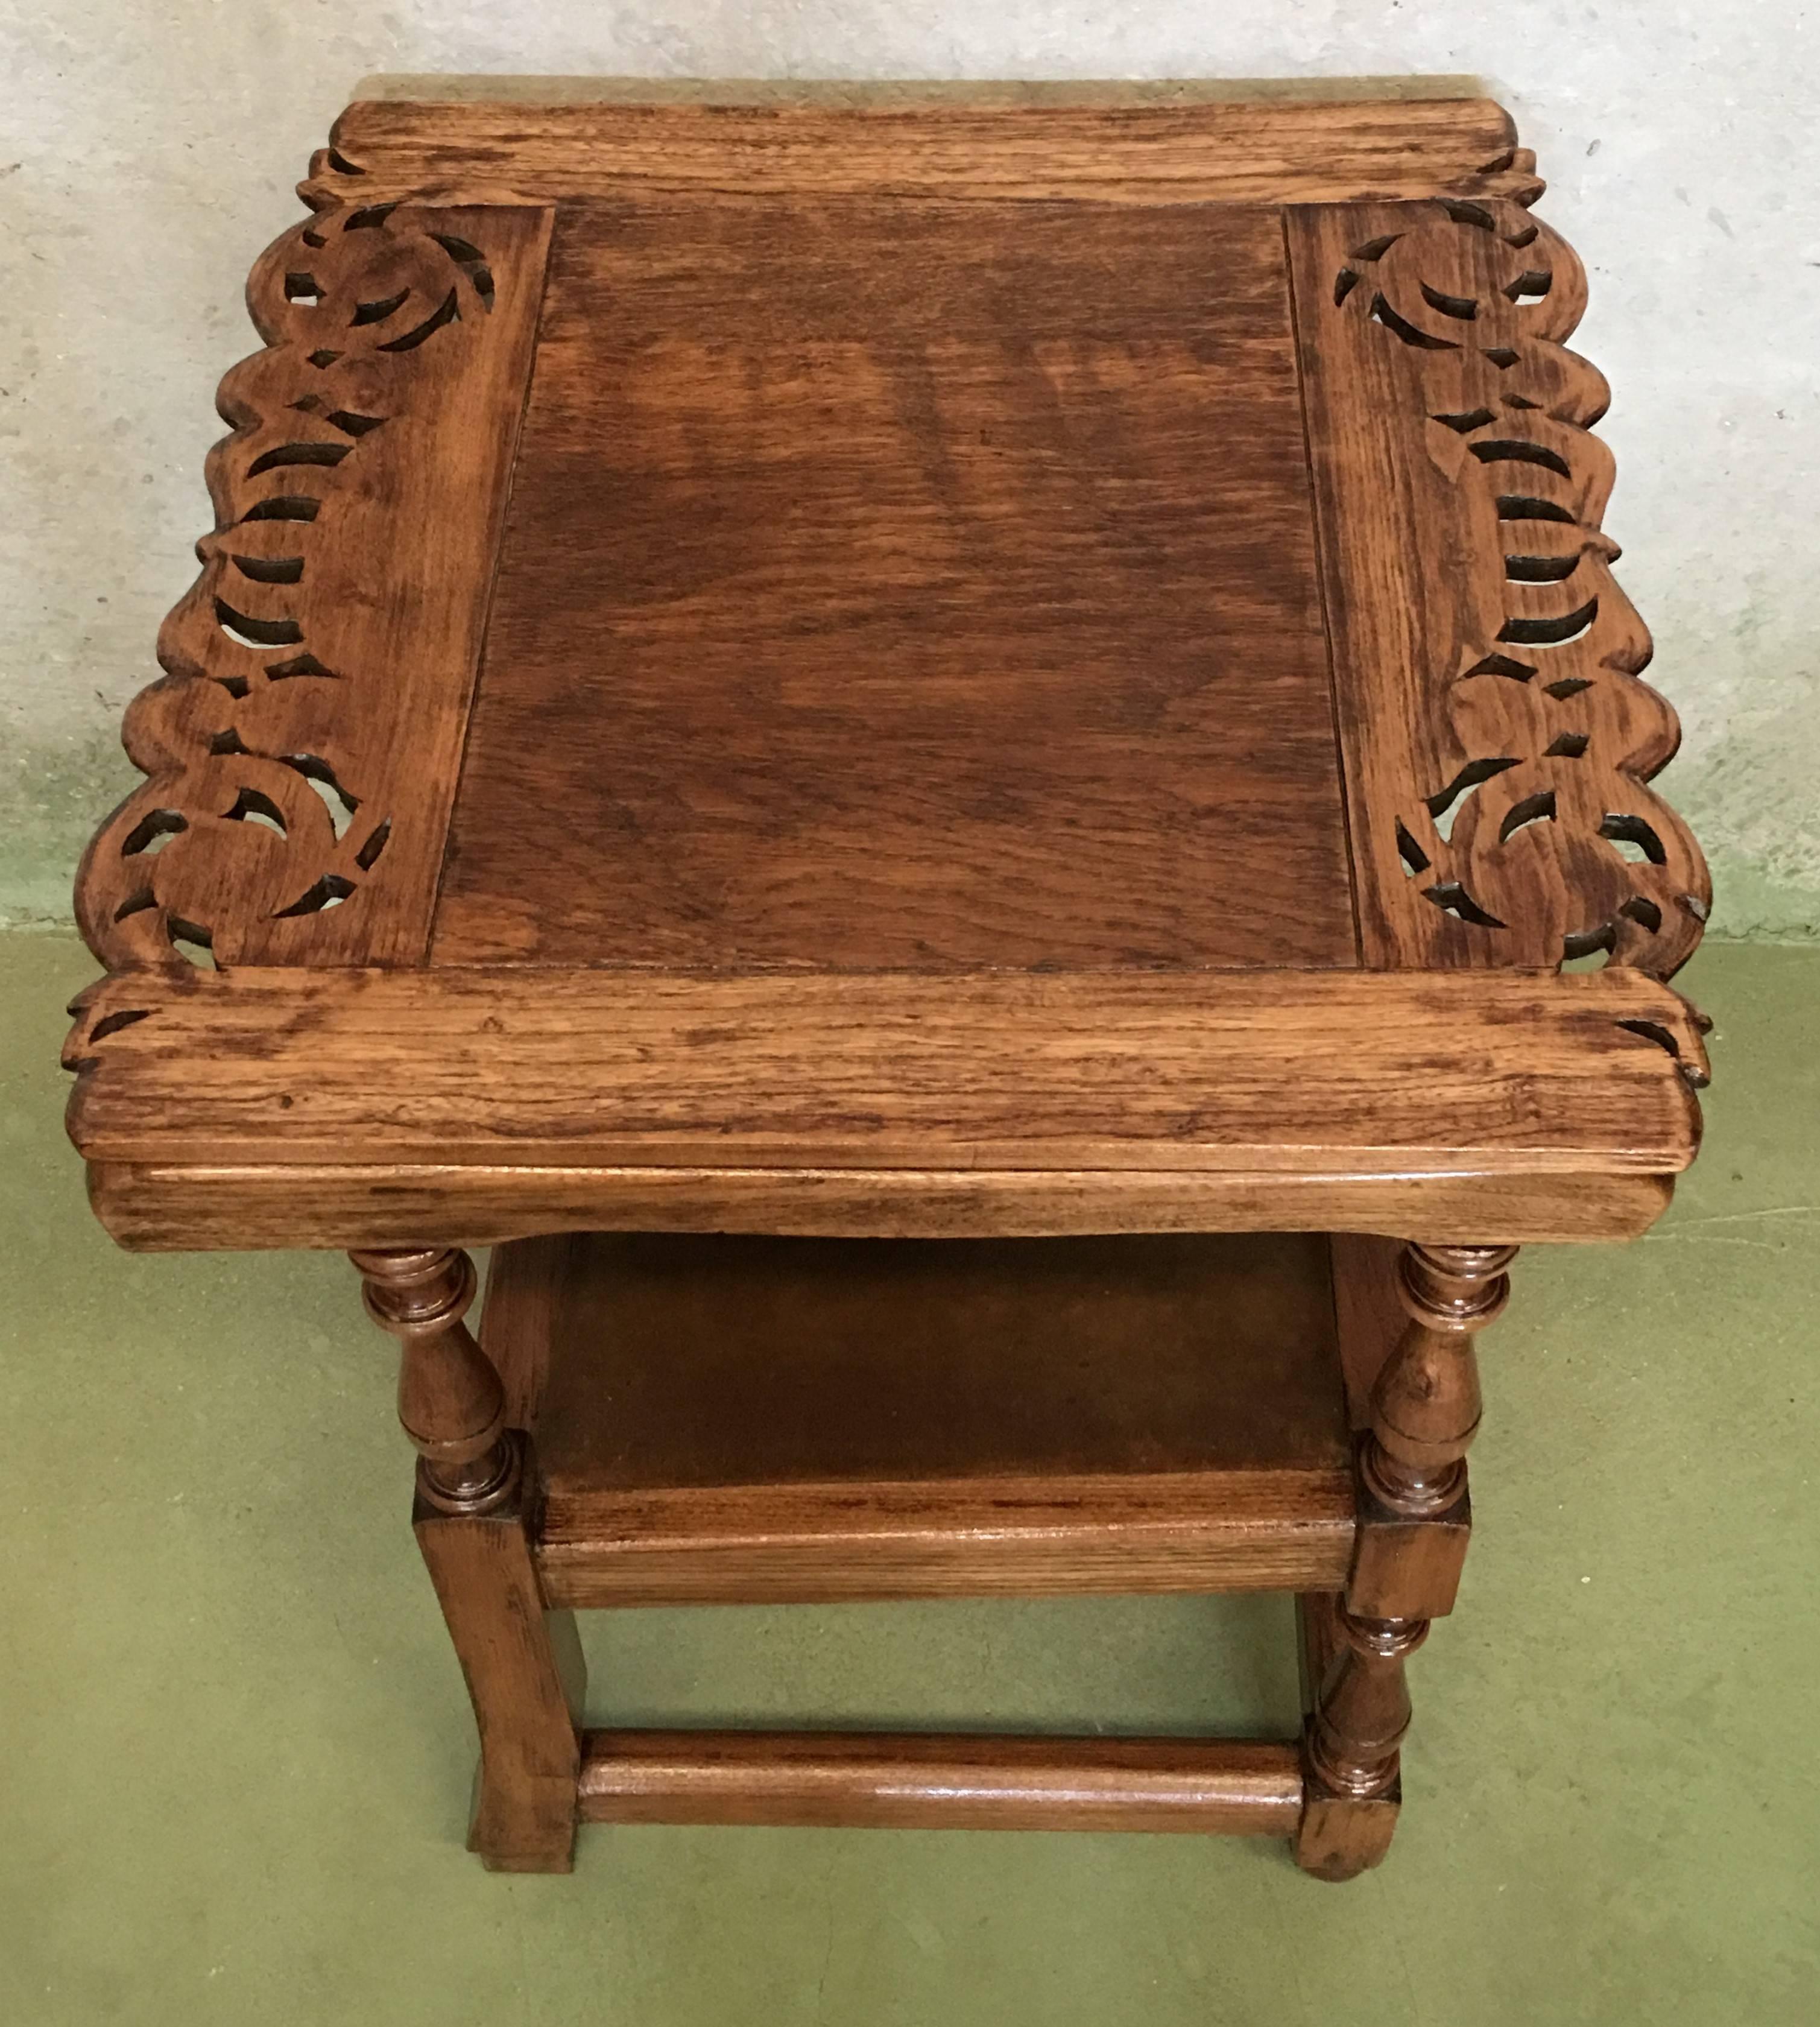 19th Century Convertible Monk's Chair or End Table. Walnut foldable Armchair 4